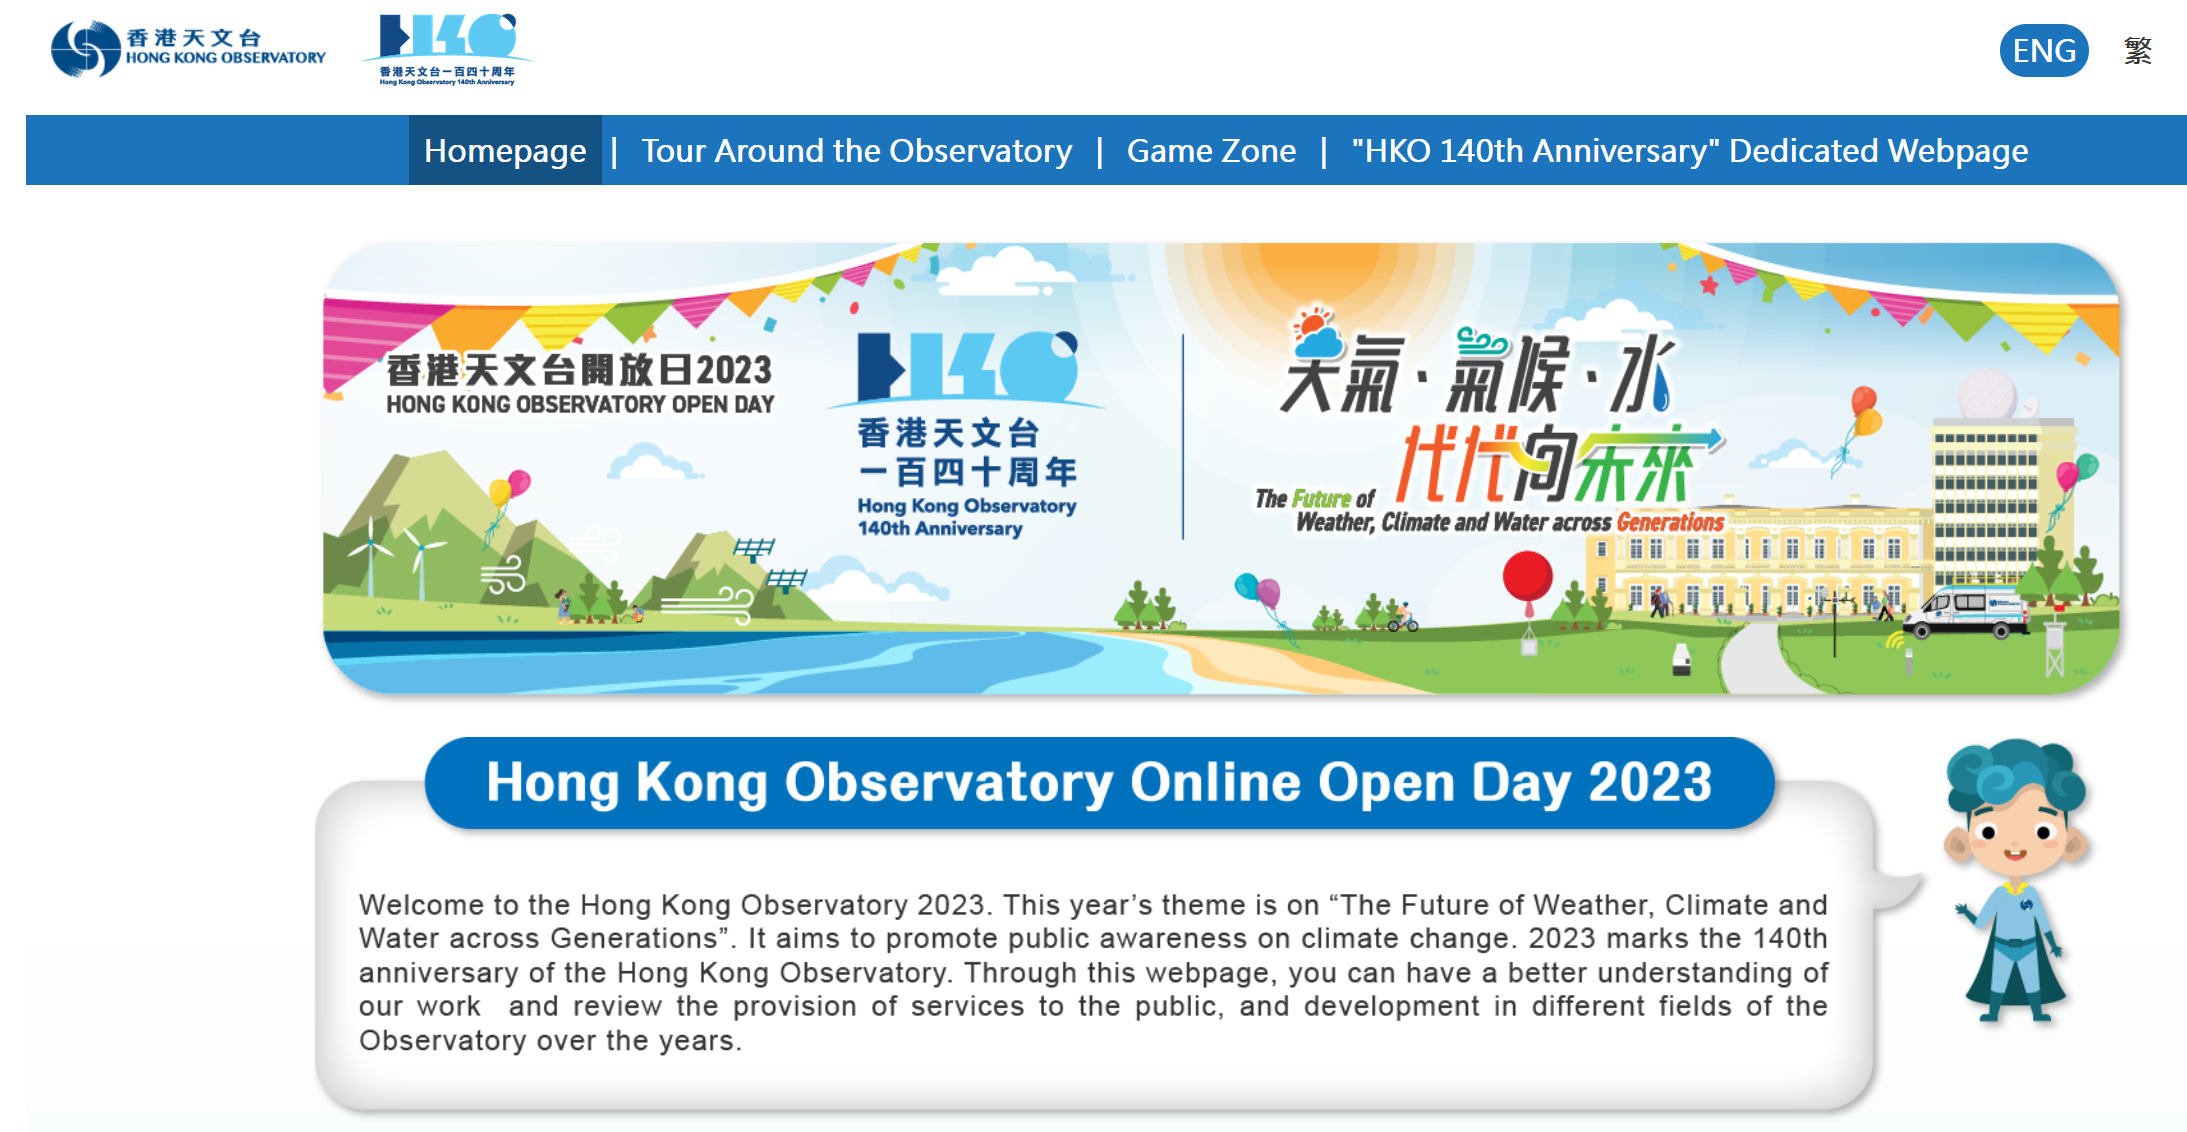 Hong Kong Observatory Open Day 2023 webpage